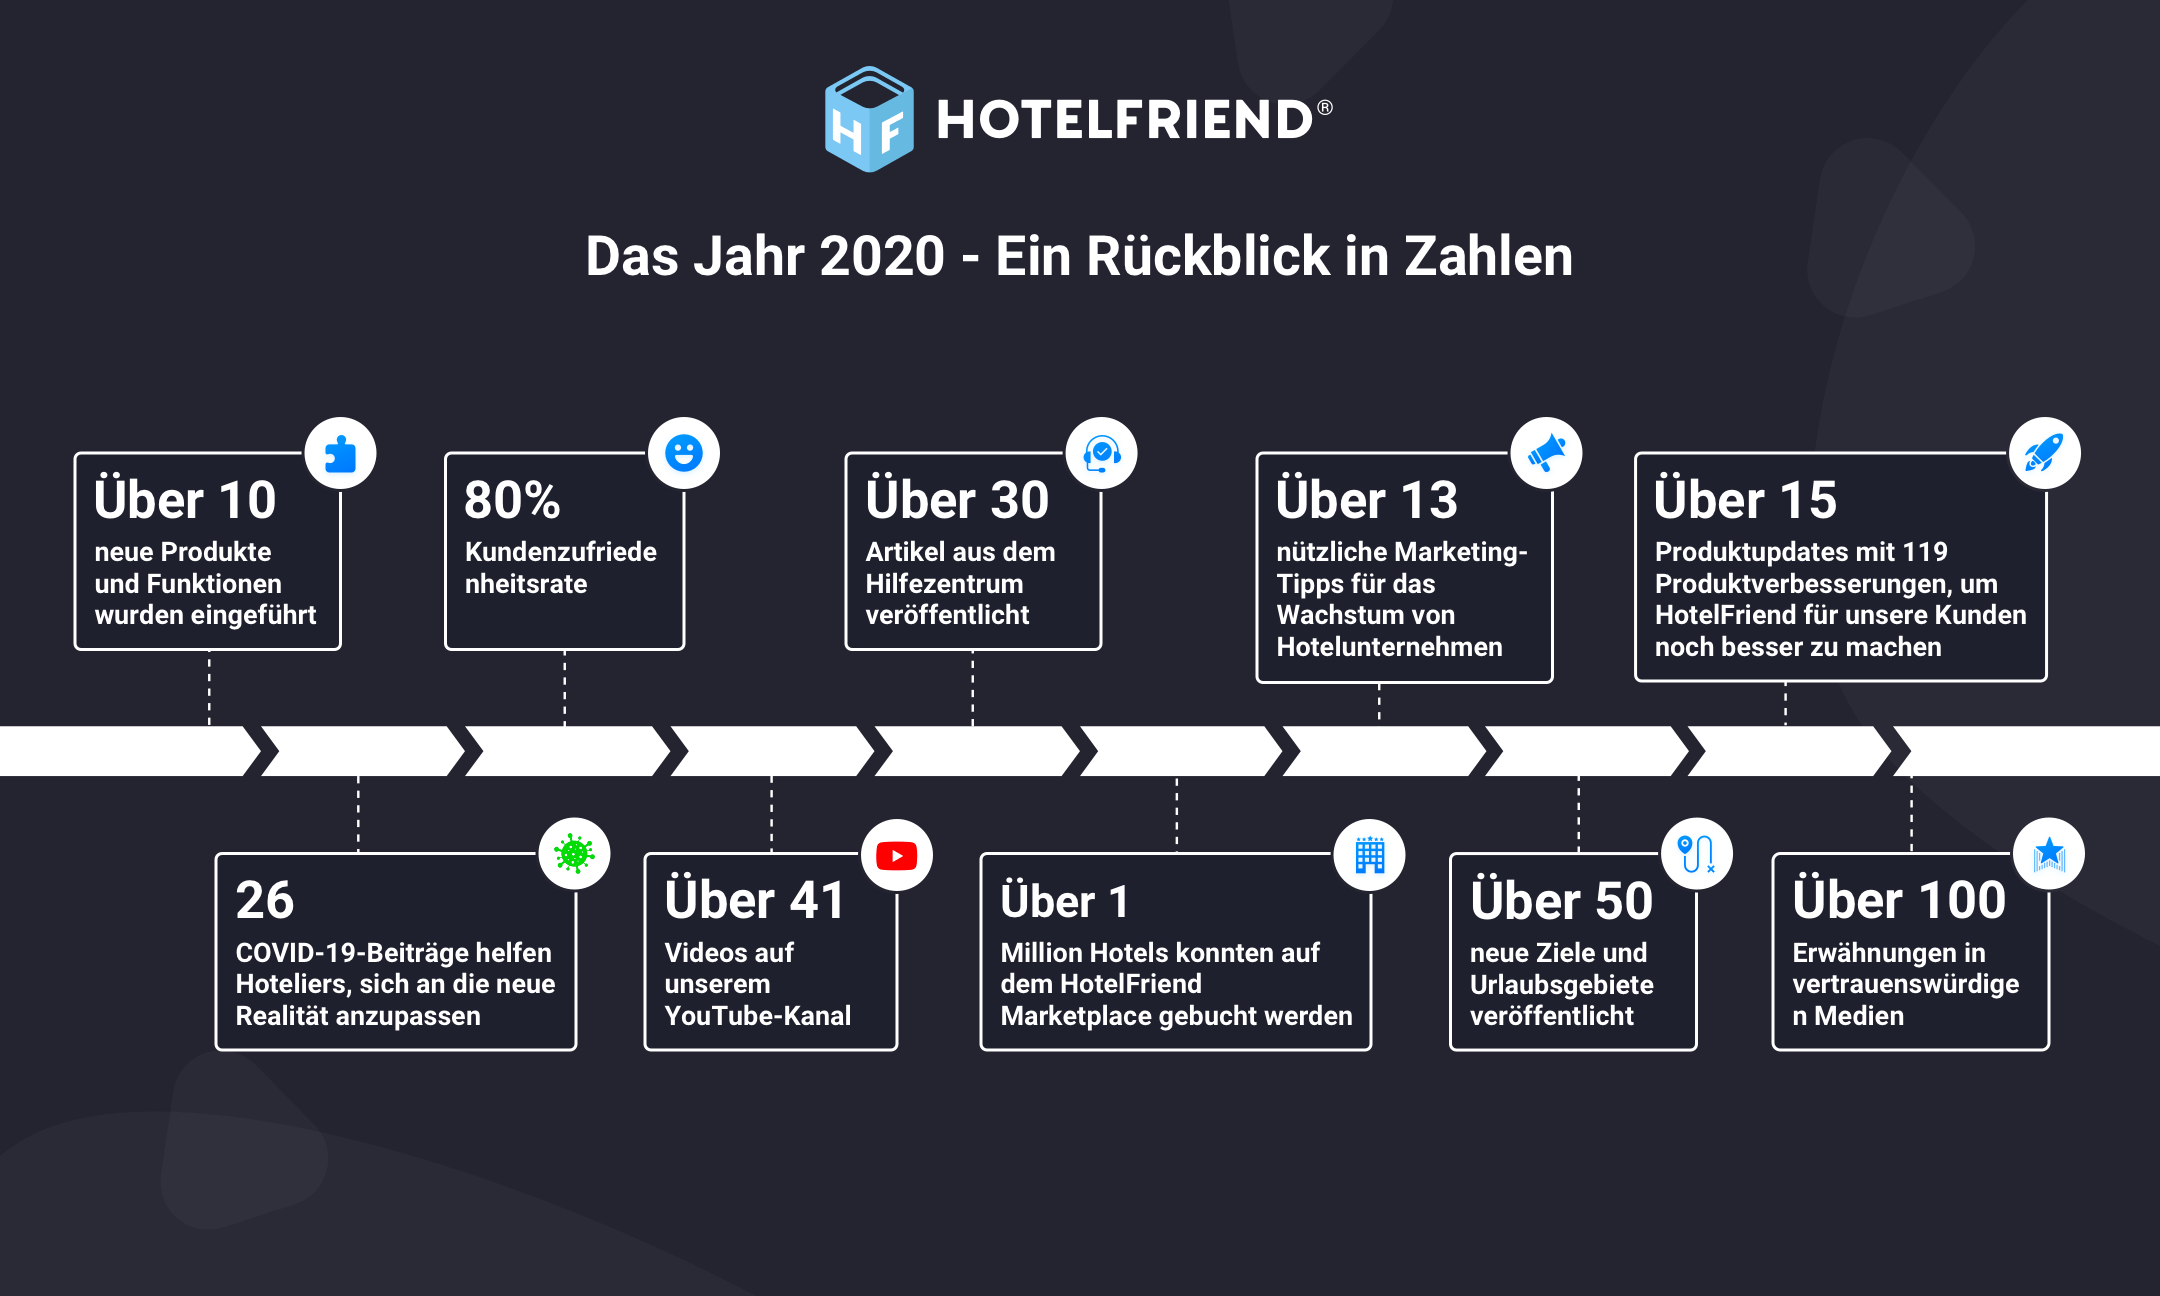 HotelFriend in 2020: The year in numbers